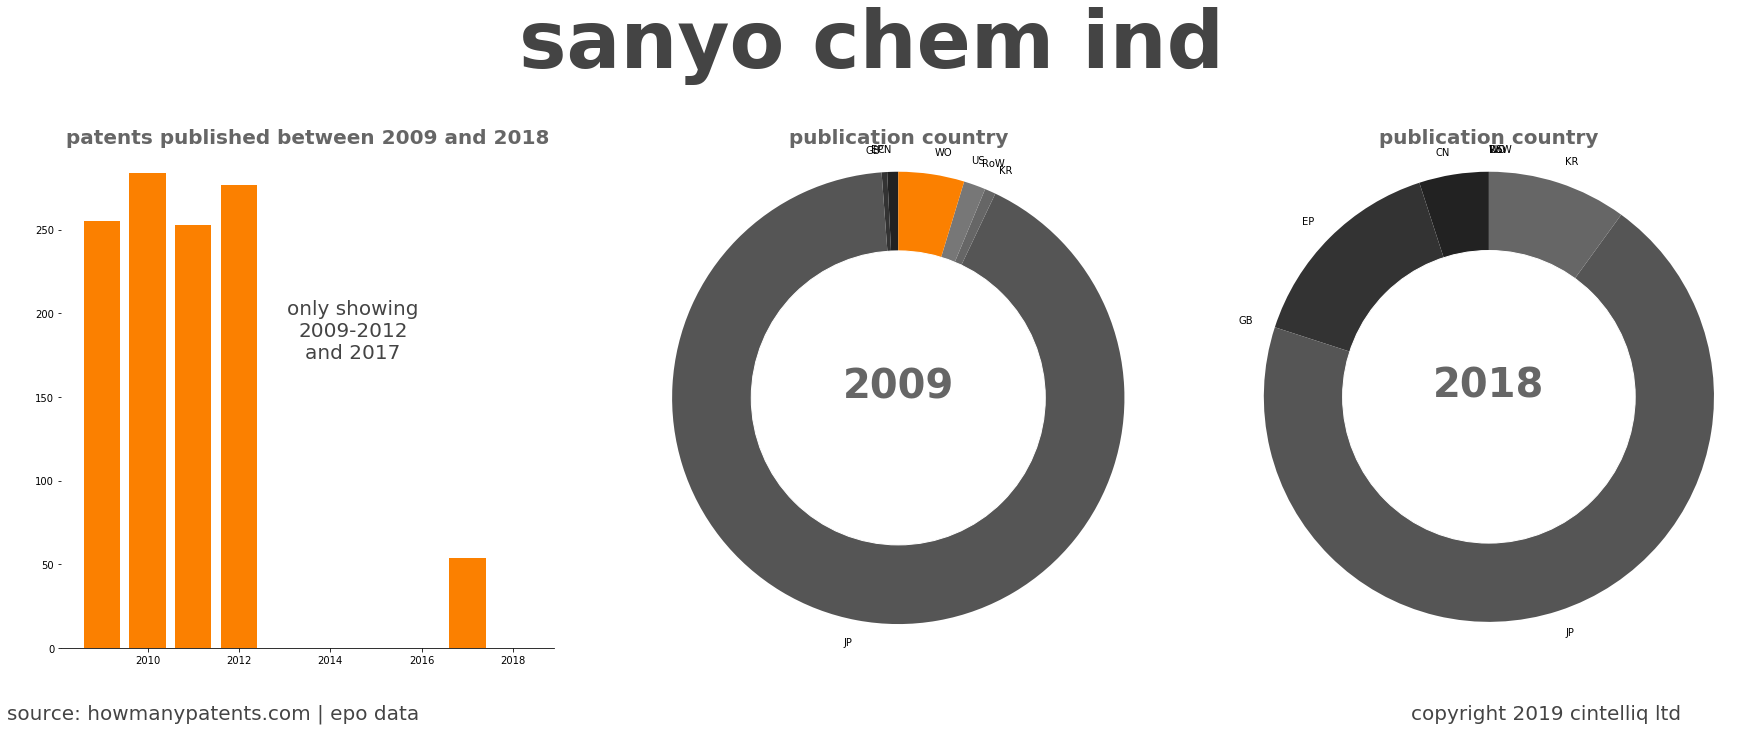 summary of patents for Sanyo Chem Ind